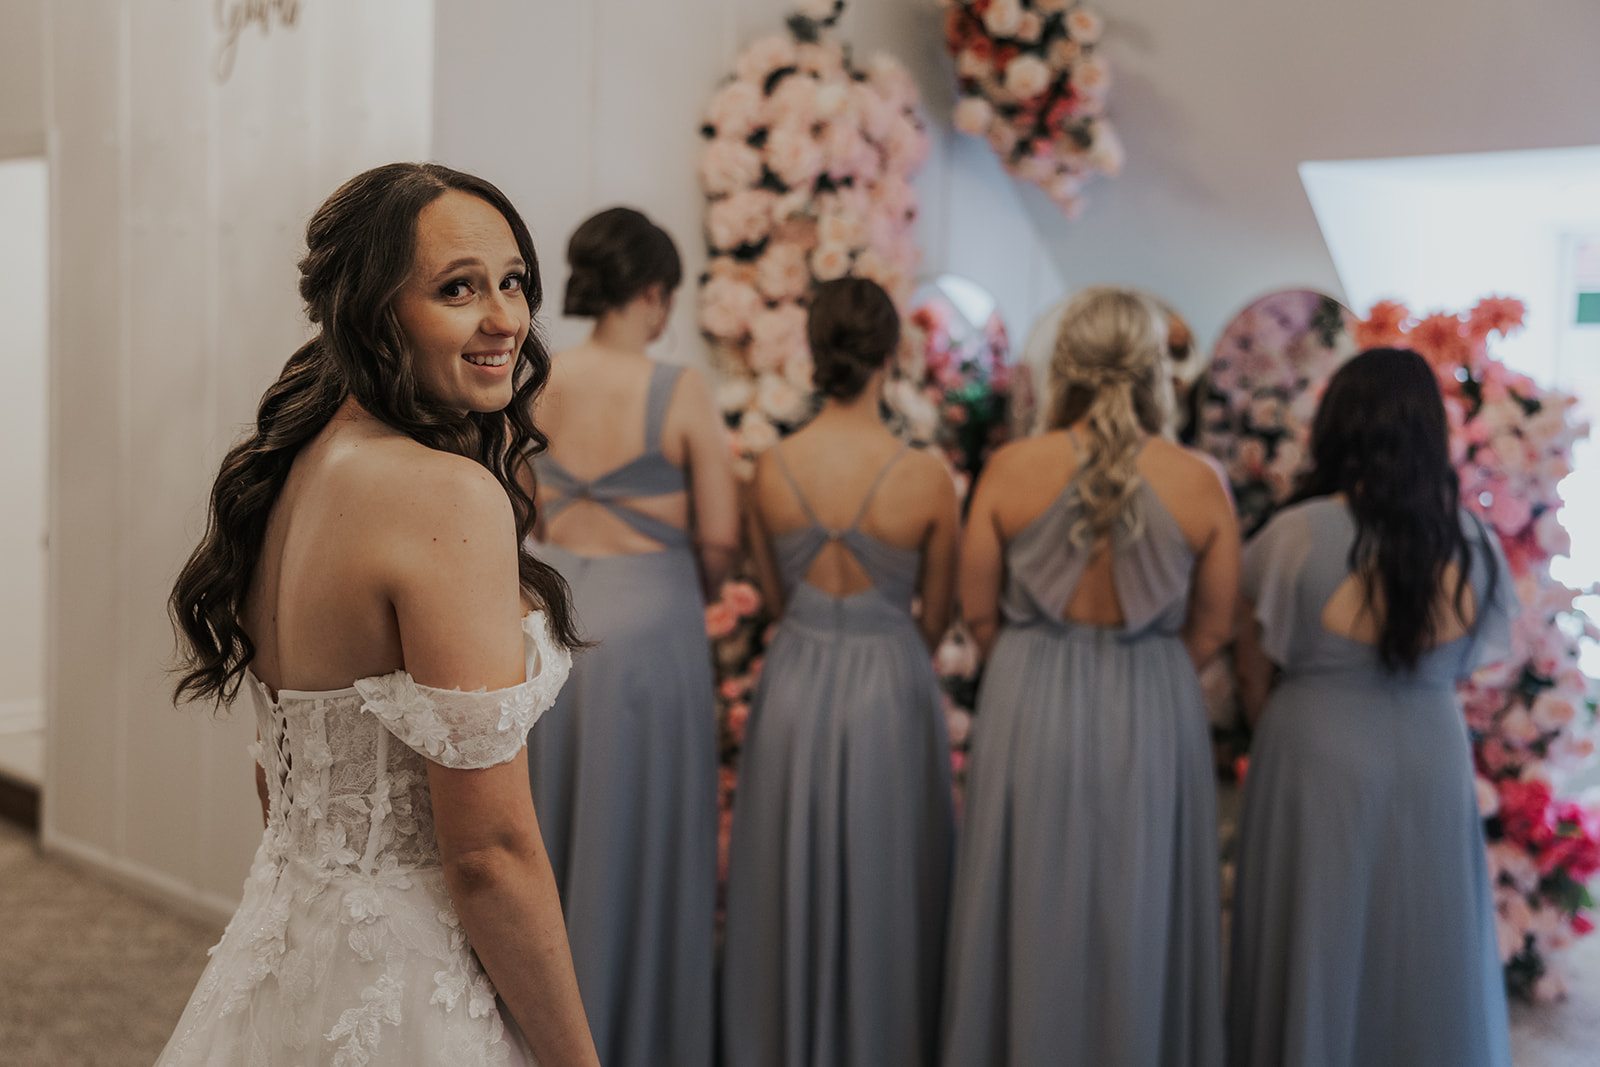 Bridesmaids prepare to see the stunning bride for the first time!